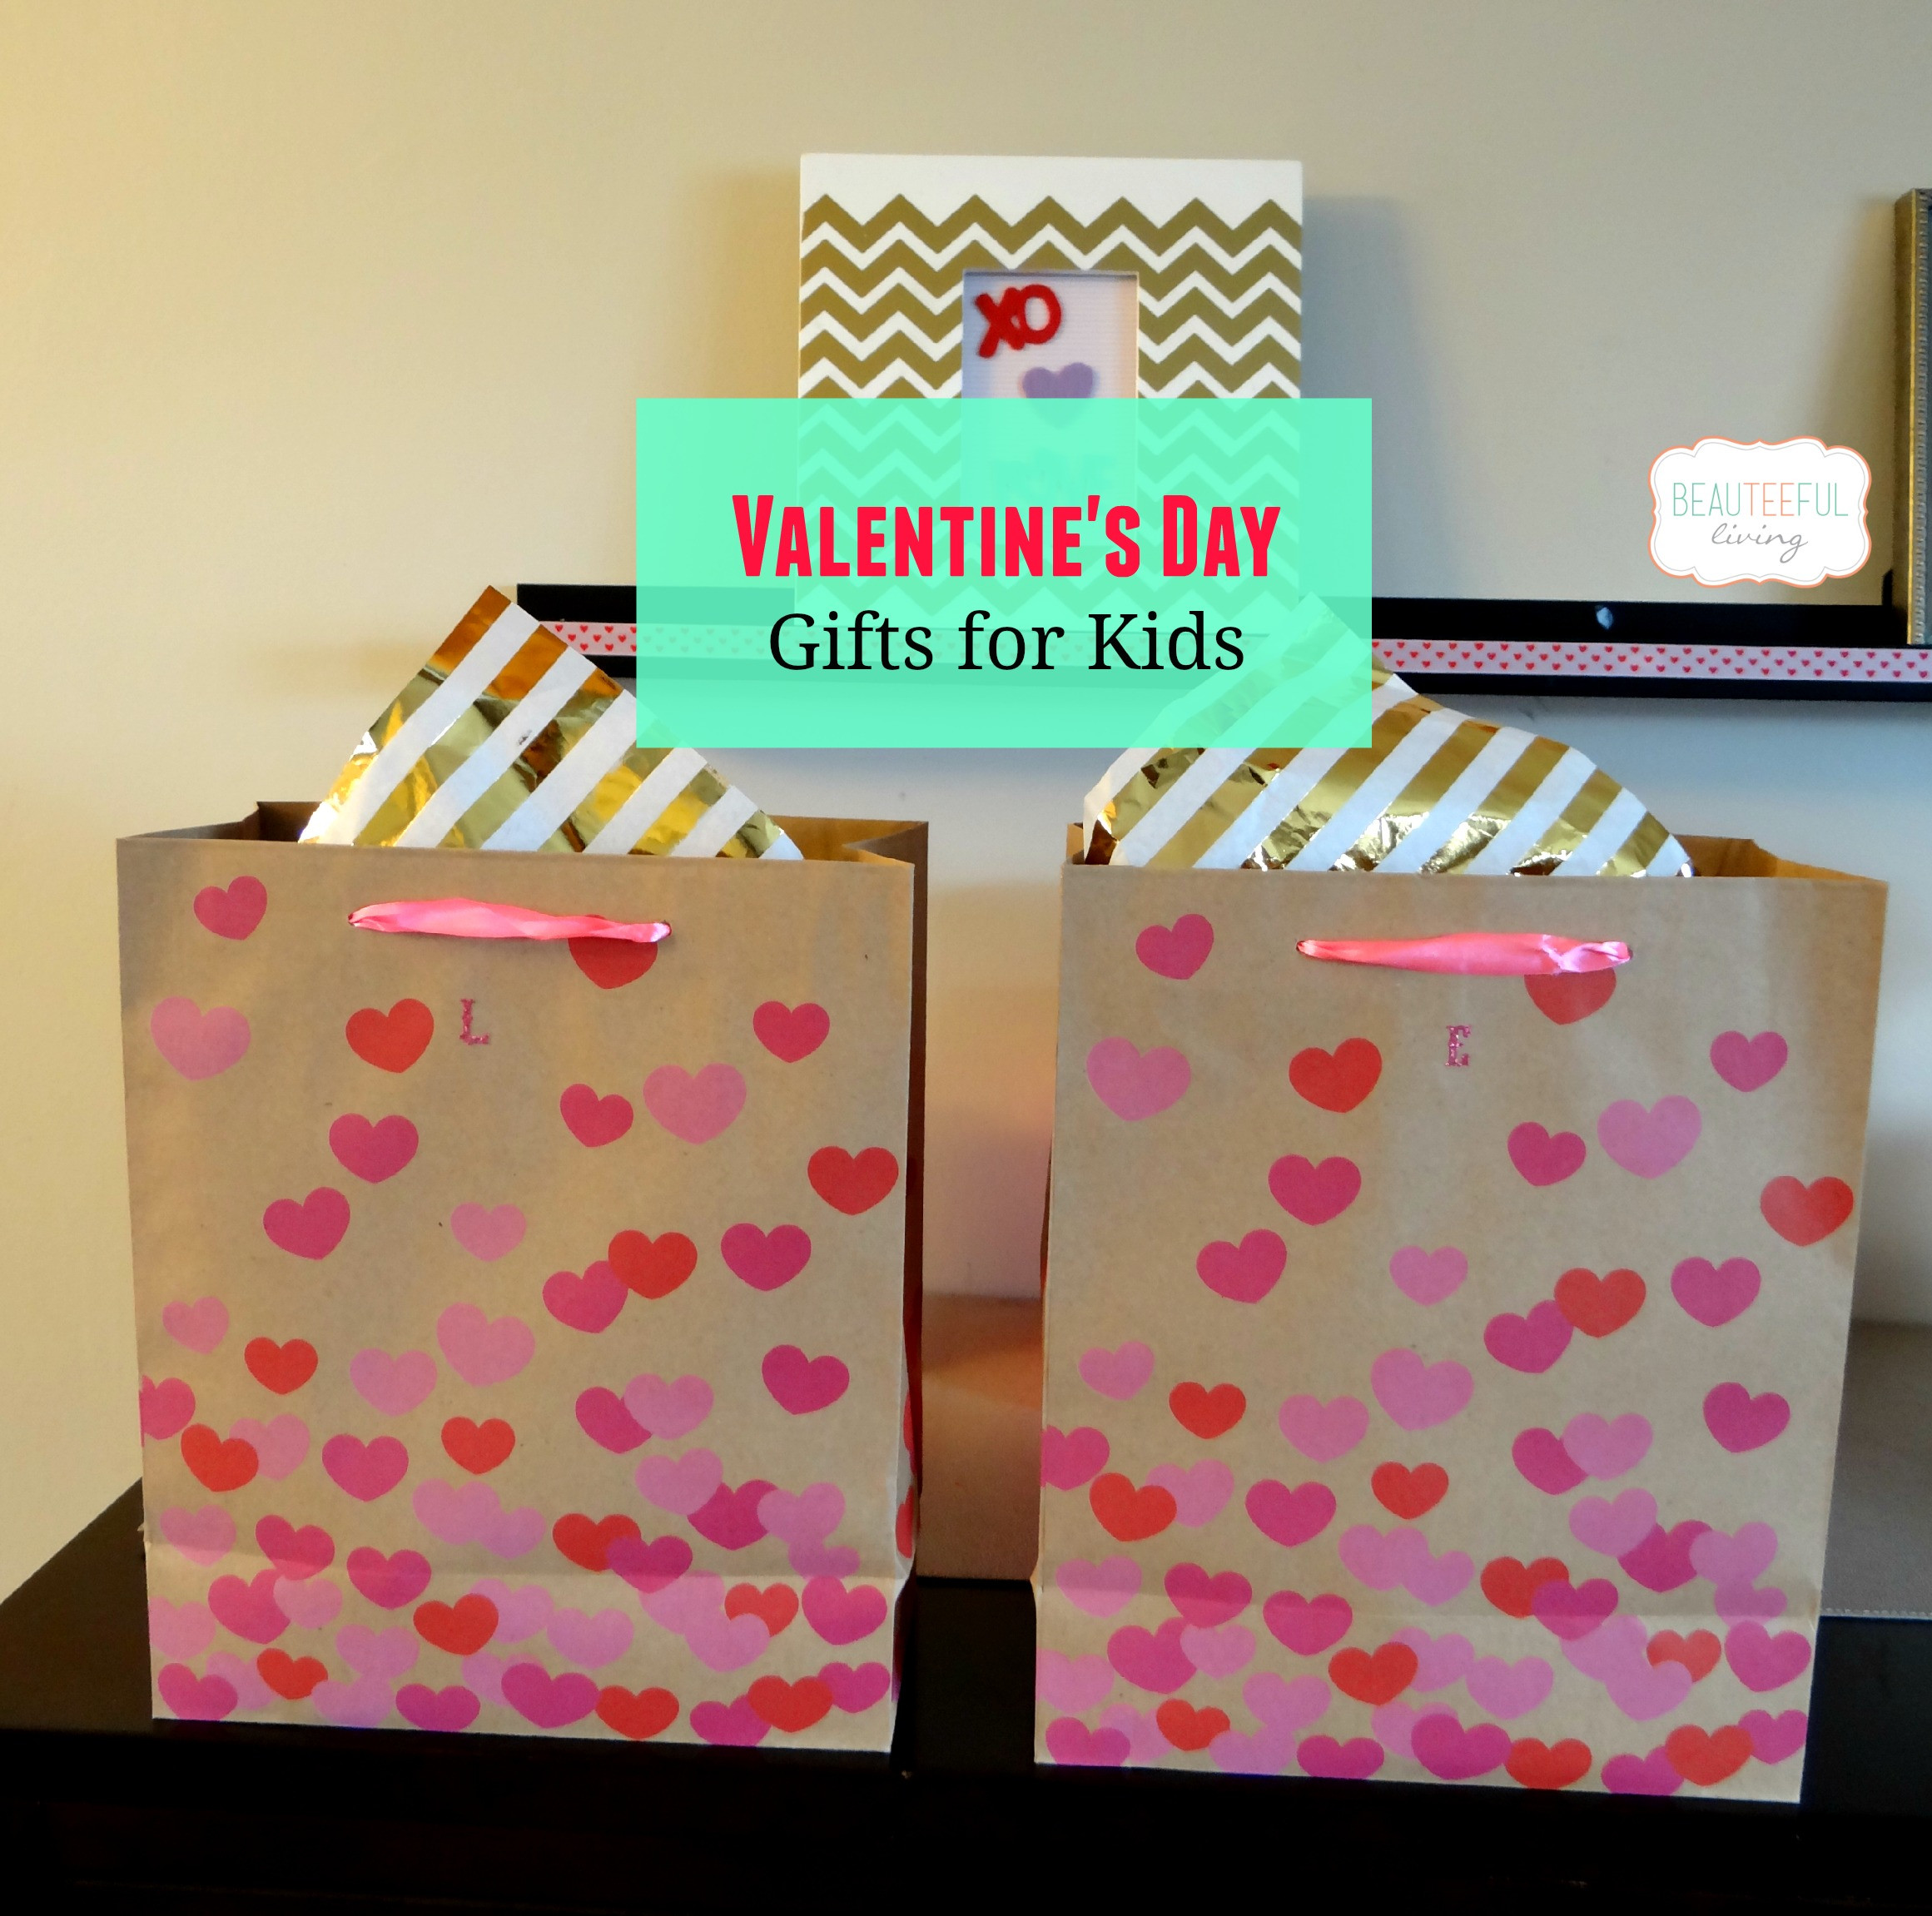 Valentine'S Day Gift Ideas For Kids
 Valentine s Day Gifts for Kids BEAUTEEFUL Living